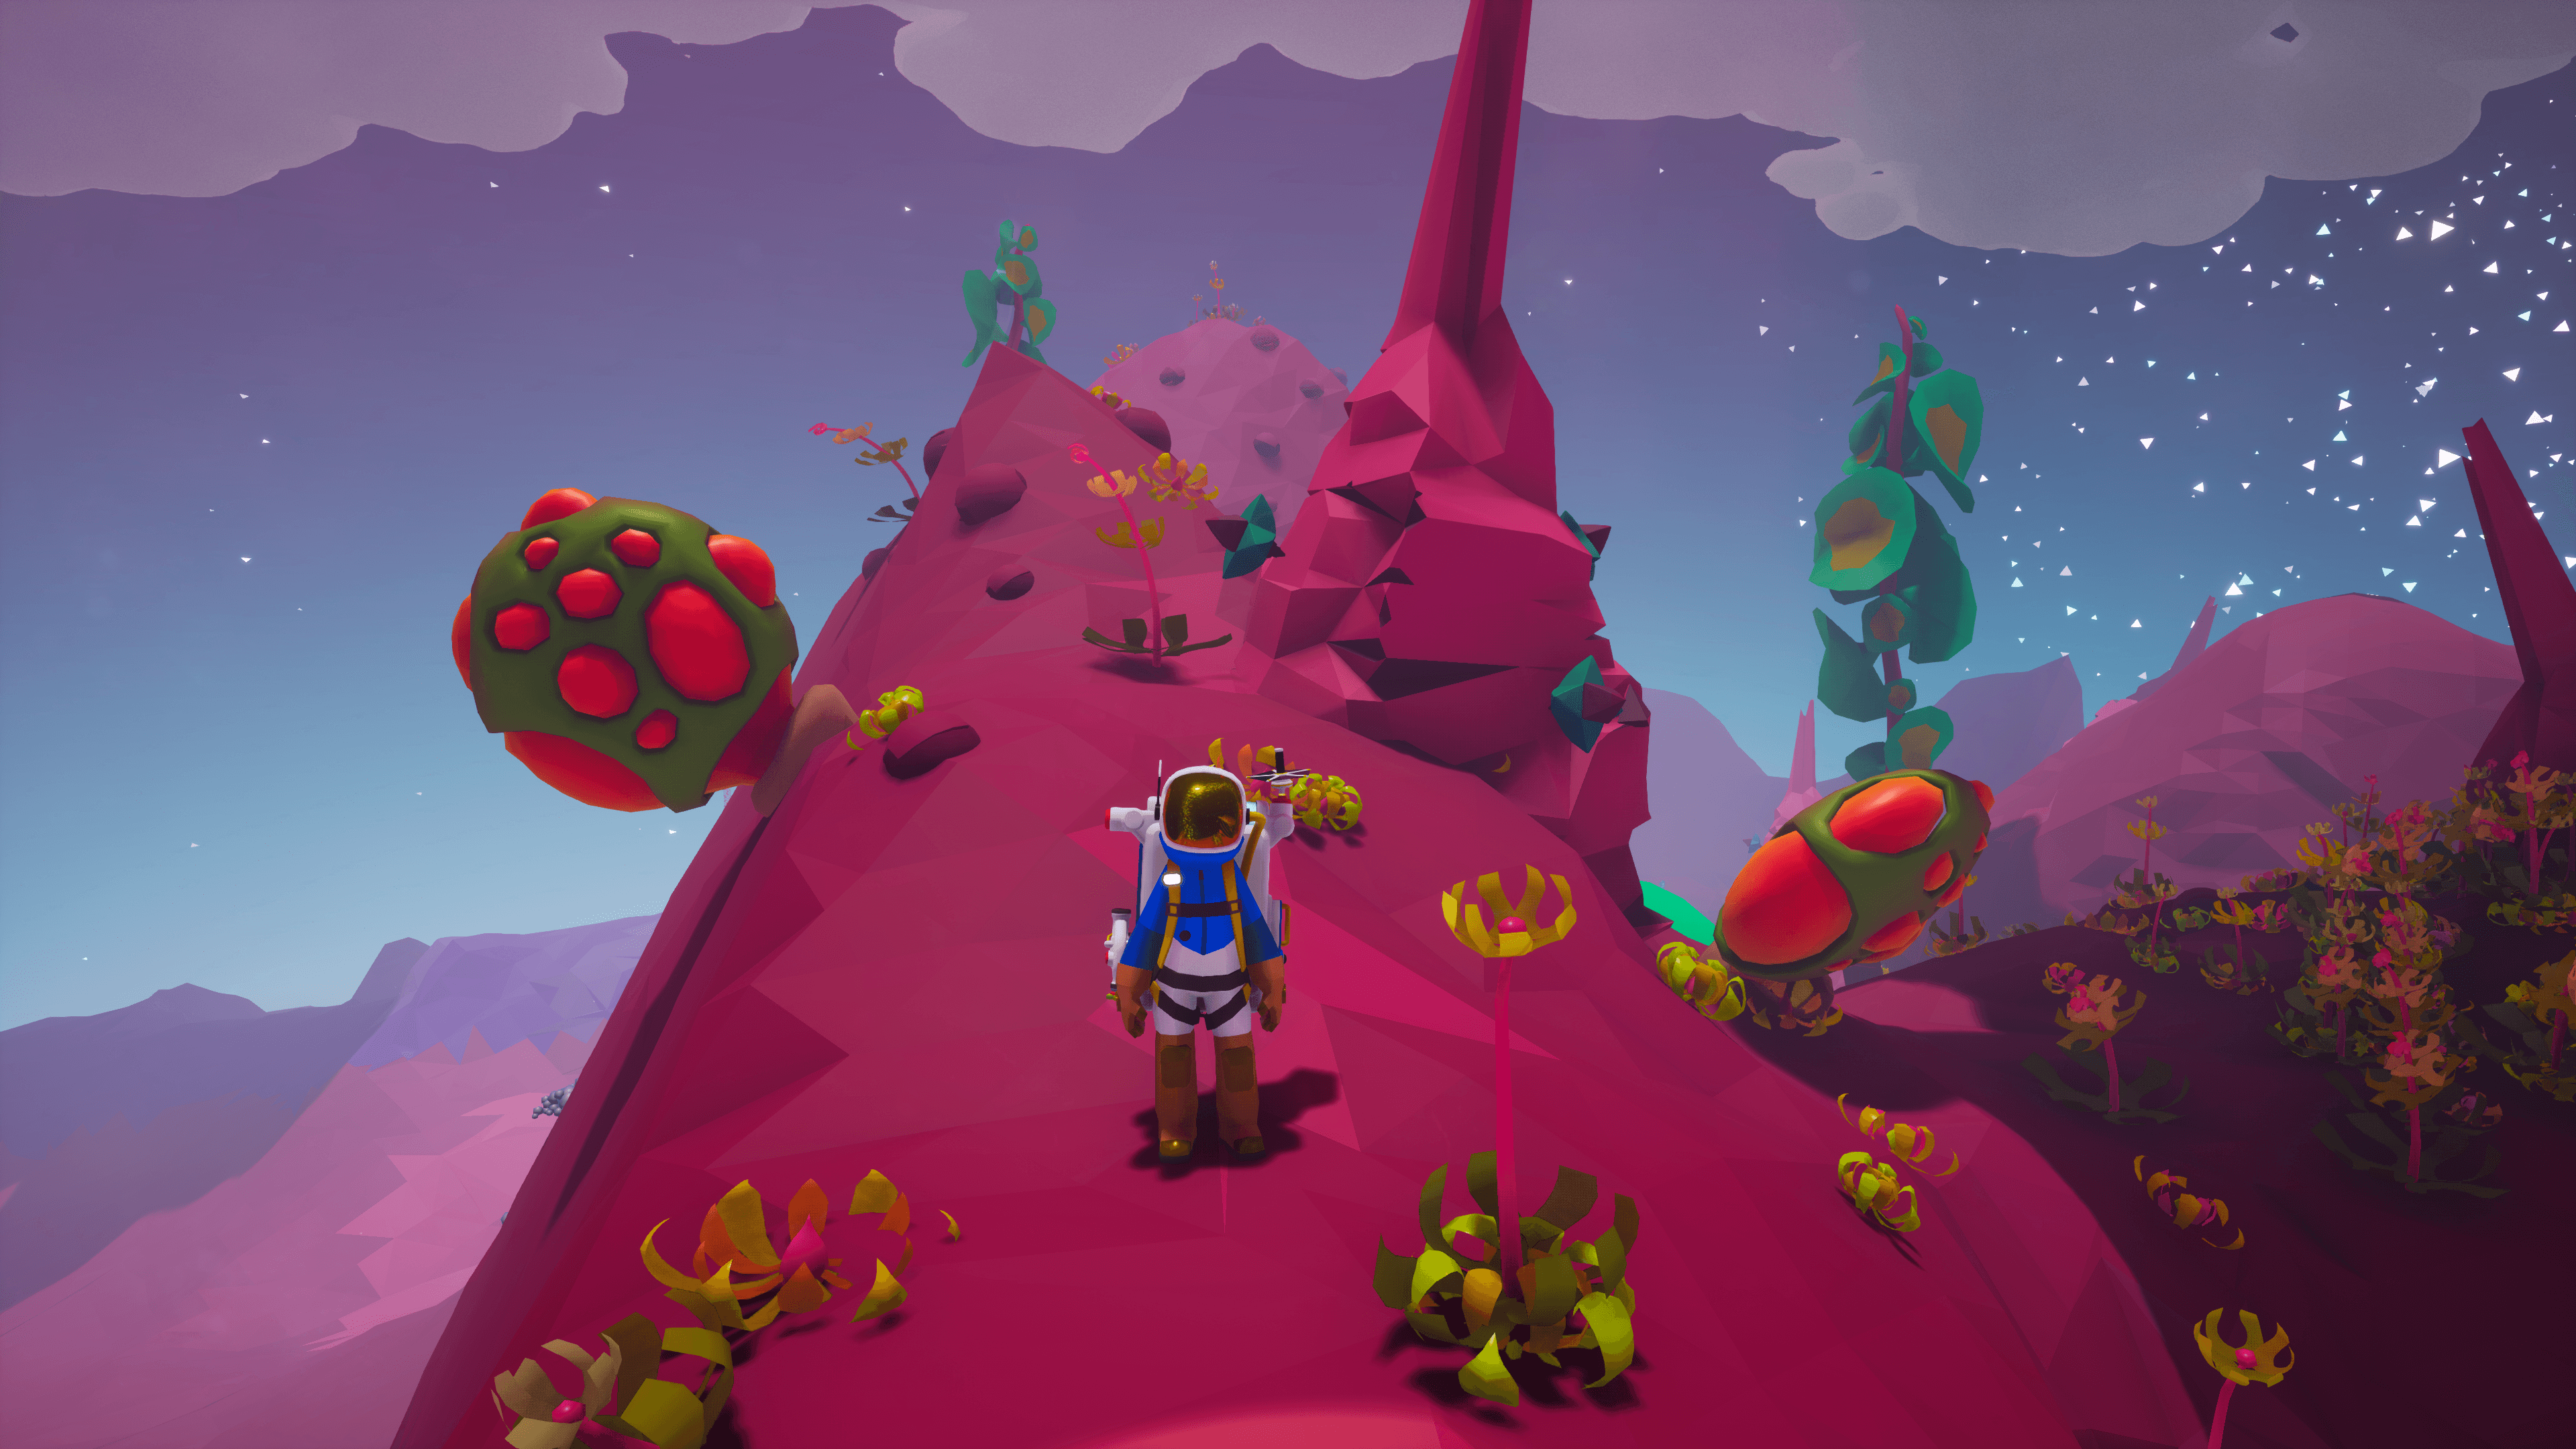 astroneer, system era softworks, eurogamer, early access, launch date, indie game, indie developers, pc gaming, windows, xbox, xbox one, microsoft, indie, videogame, gaming, pr, videogame pr